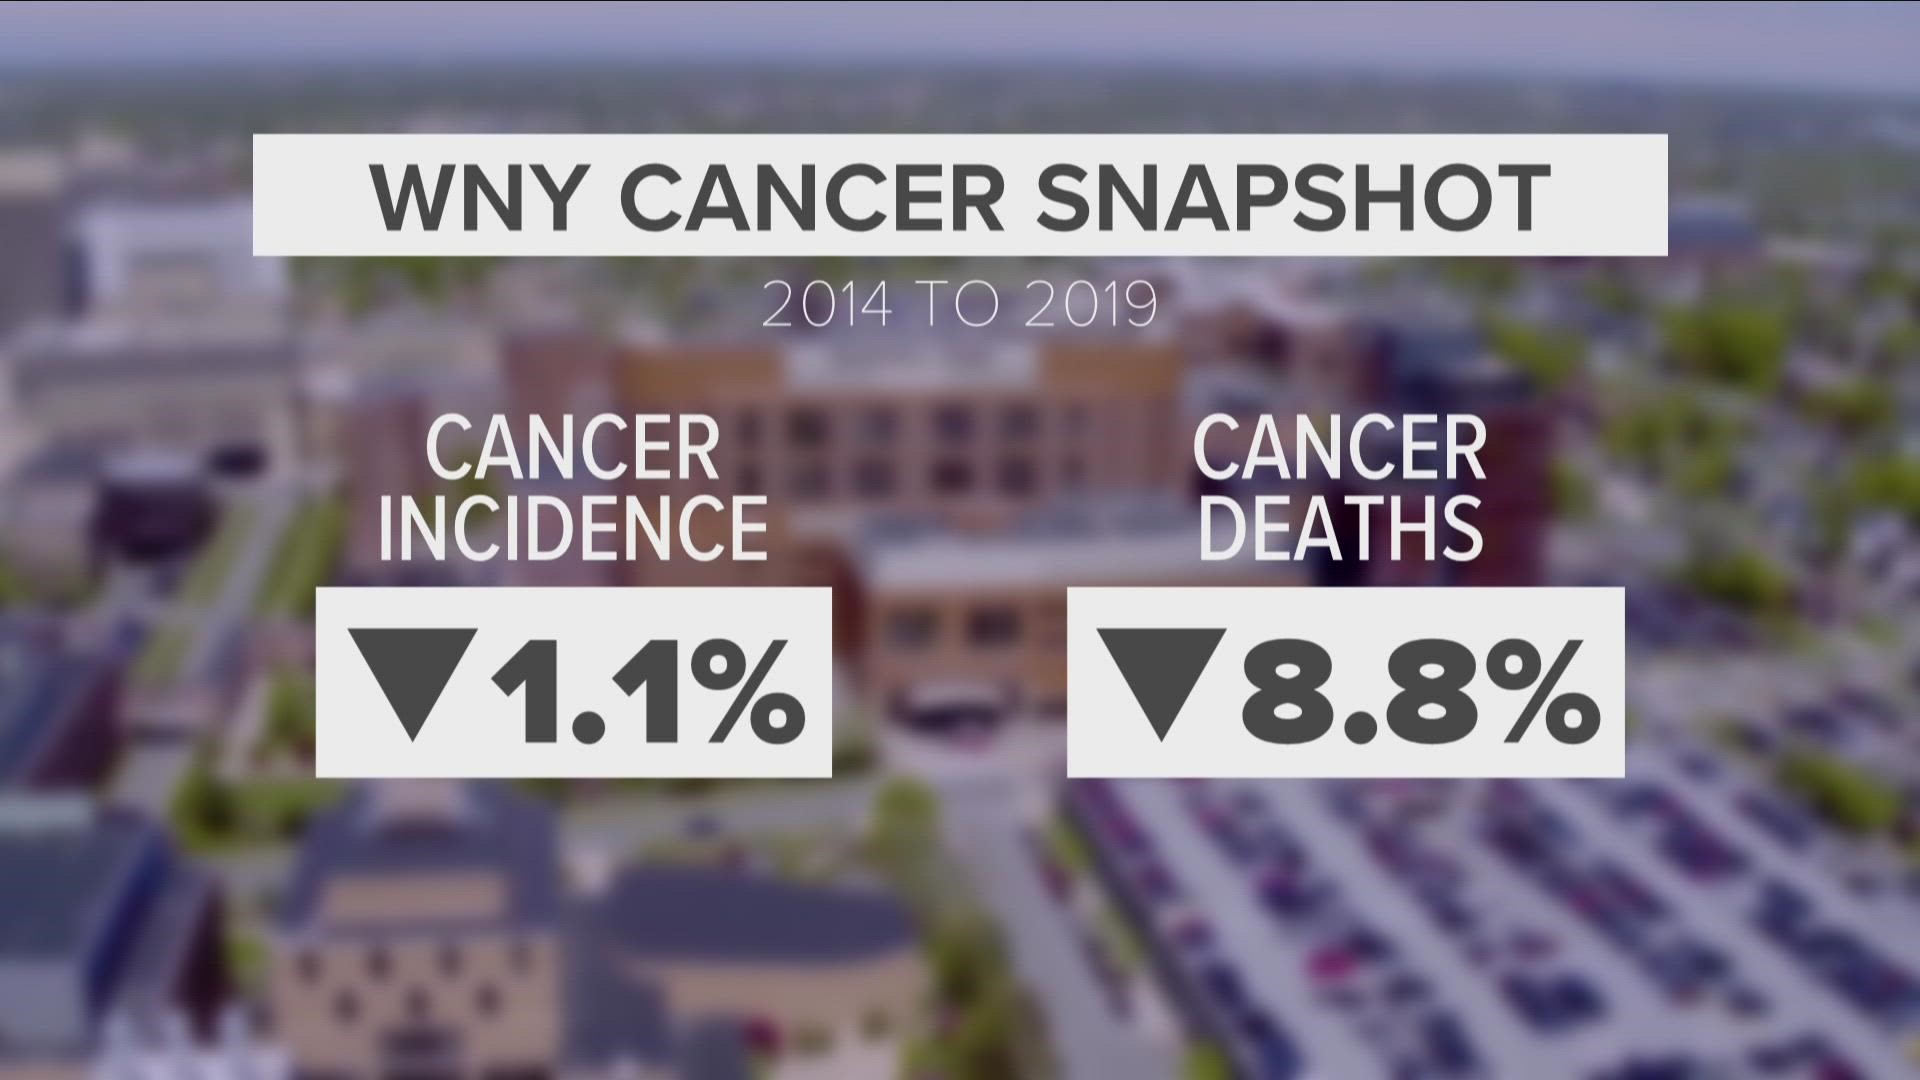 Looking at numbers from 2014 to 2019, overall cancer incidence in our region went down by a percentage point. Even better news, cancer deaths decreased.